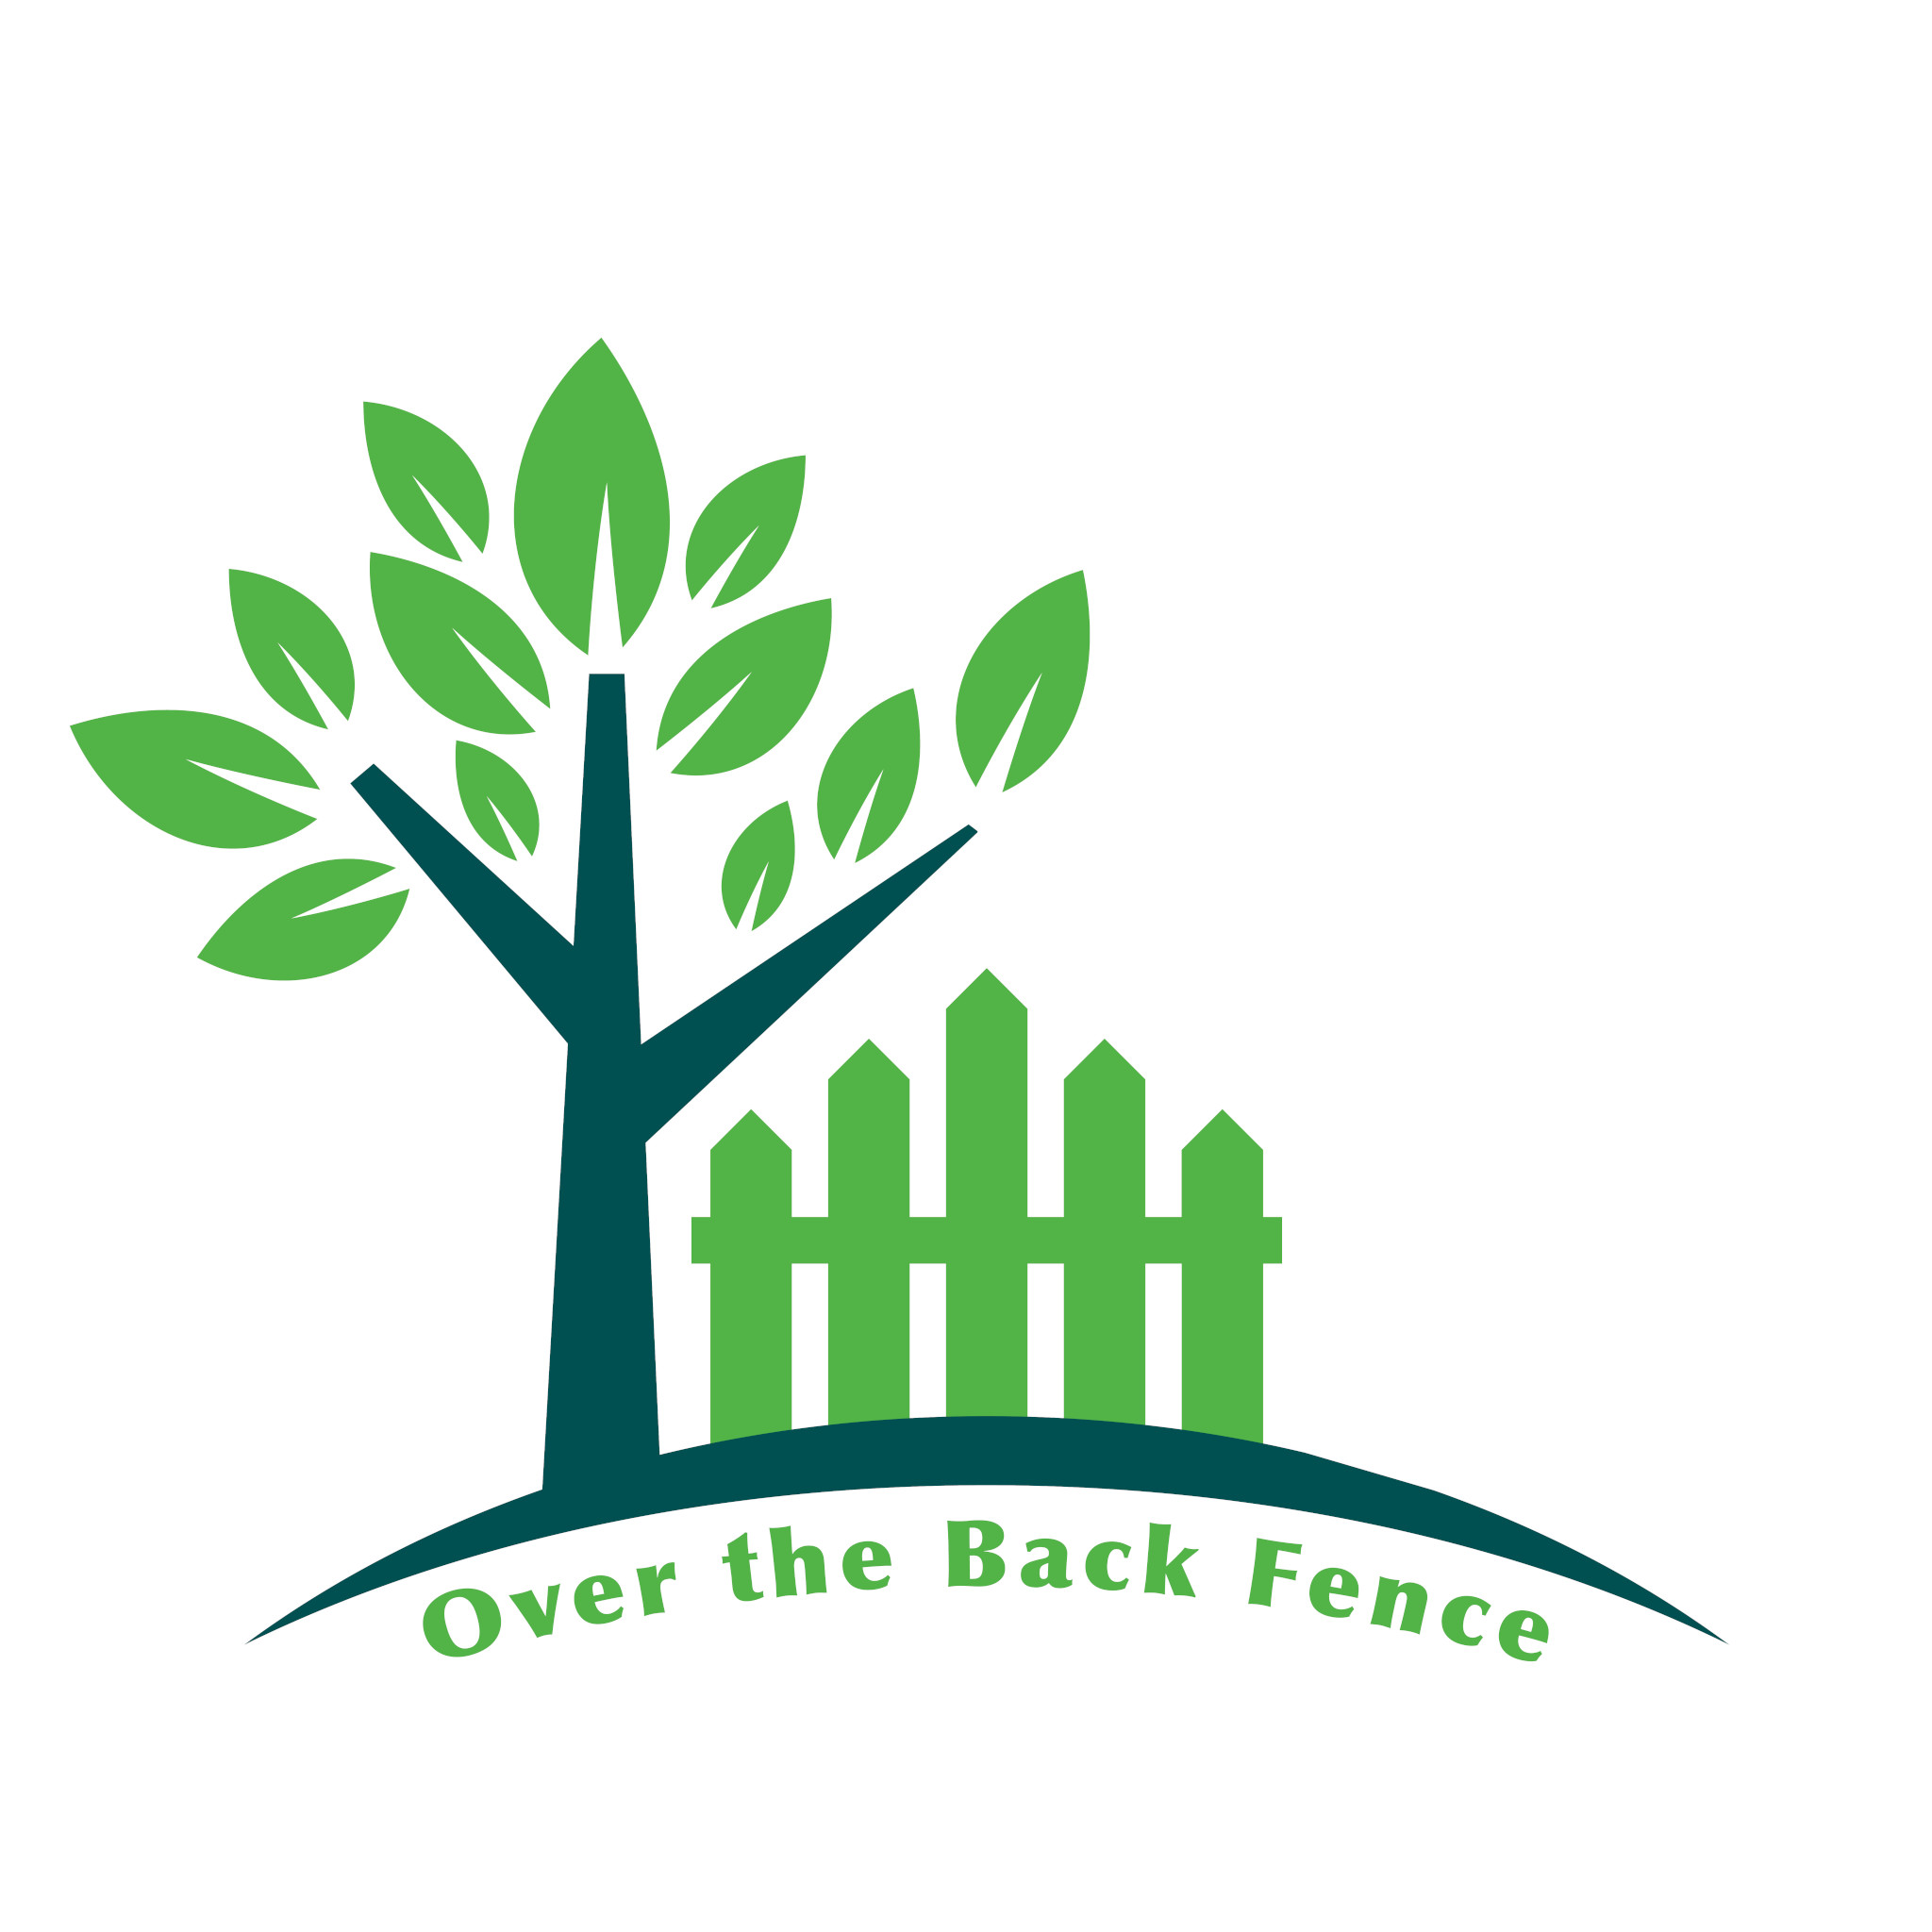 Over the Back Fence logo